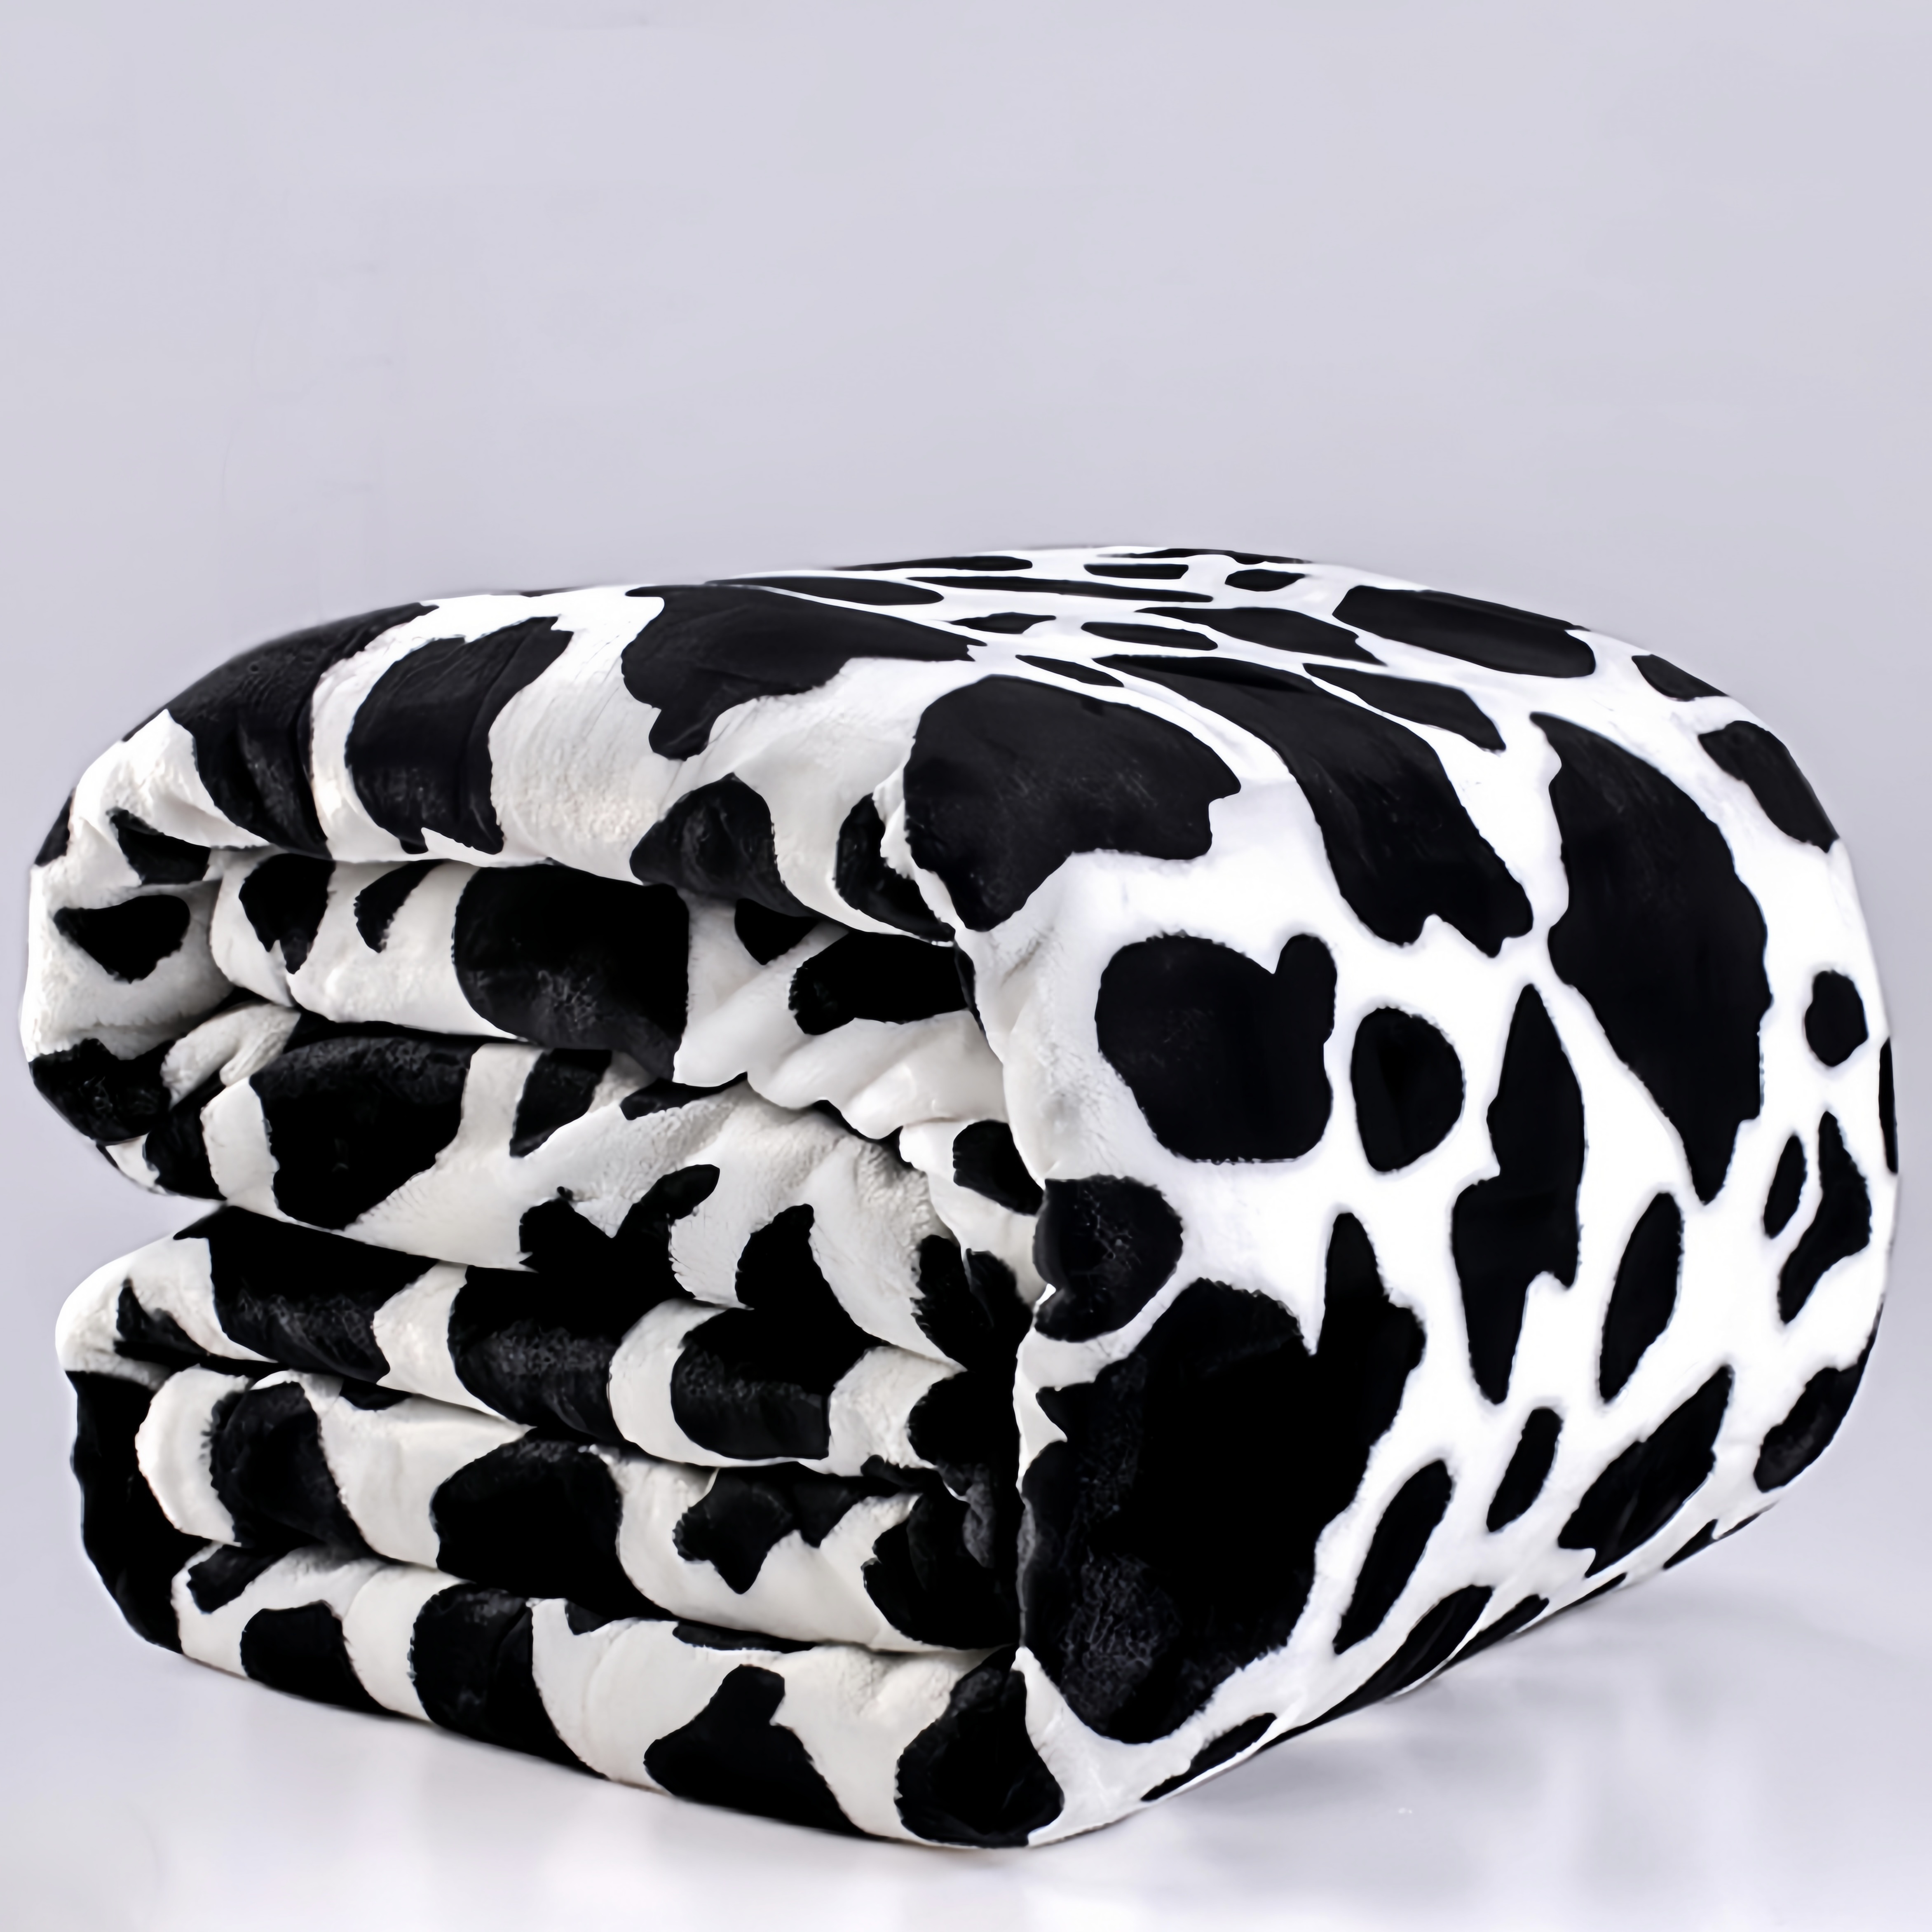 

1pc Cow Printed Flannel Blanket, Double-sided Blanket Gift, Warm Soft Black And White Bed Blanket For Couch Bed Sofa Travelling, Birthday Gift Air Conditioning Blanket